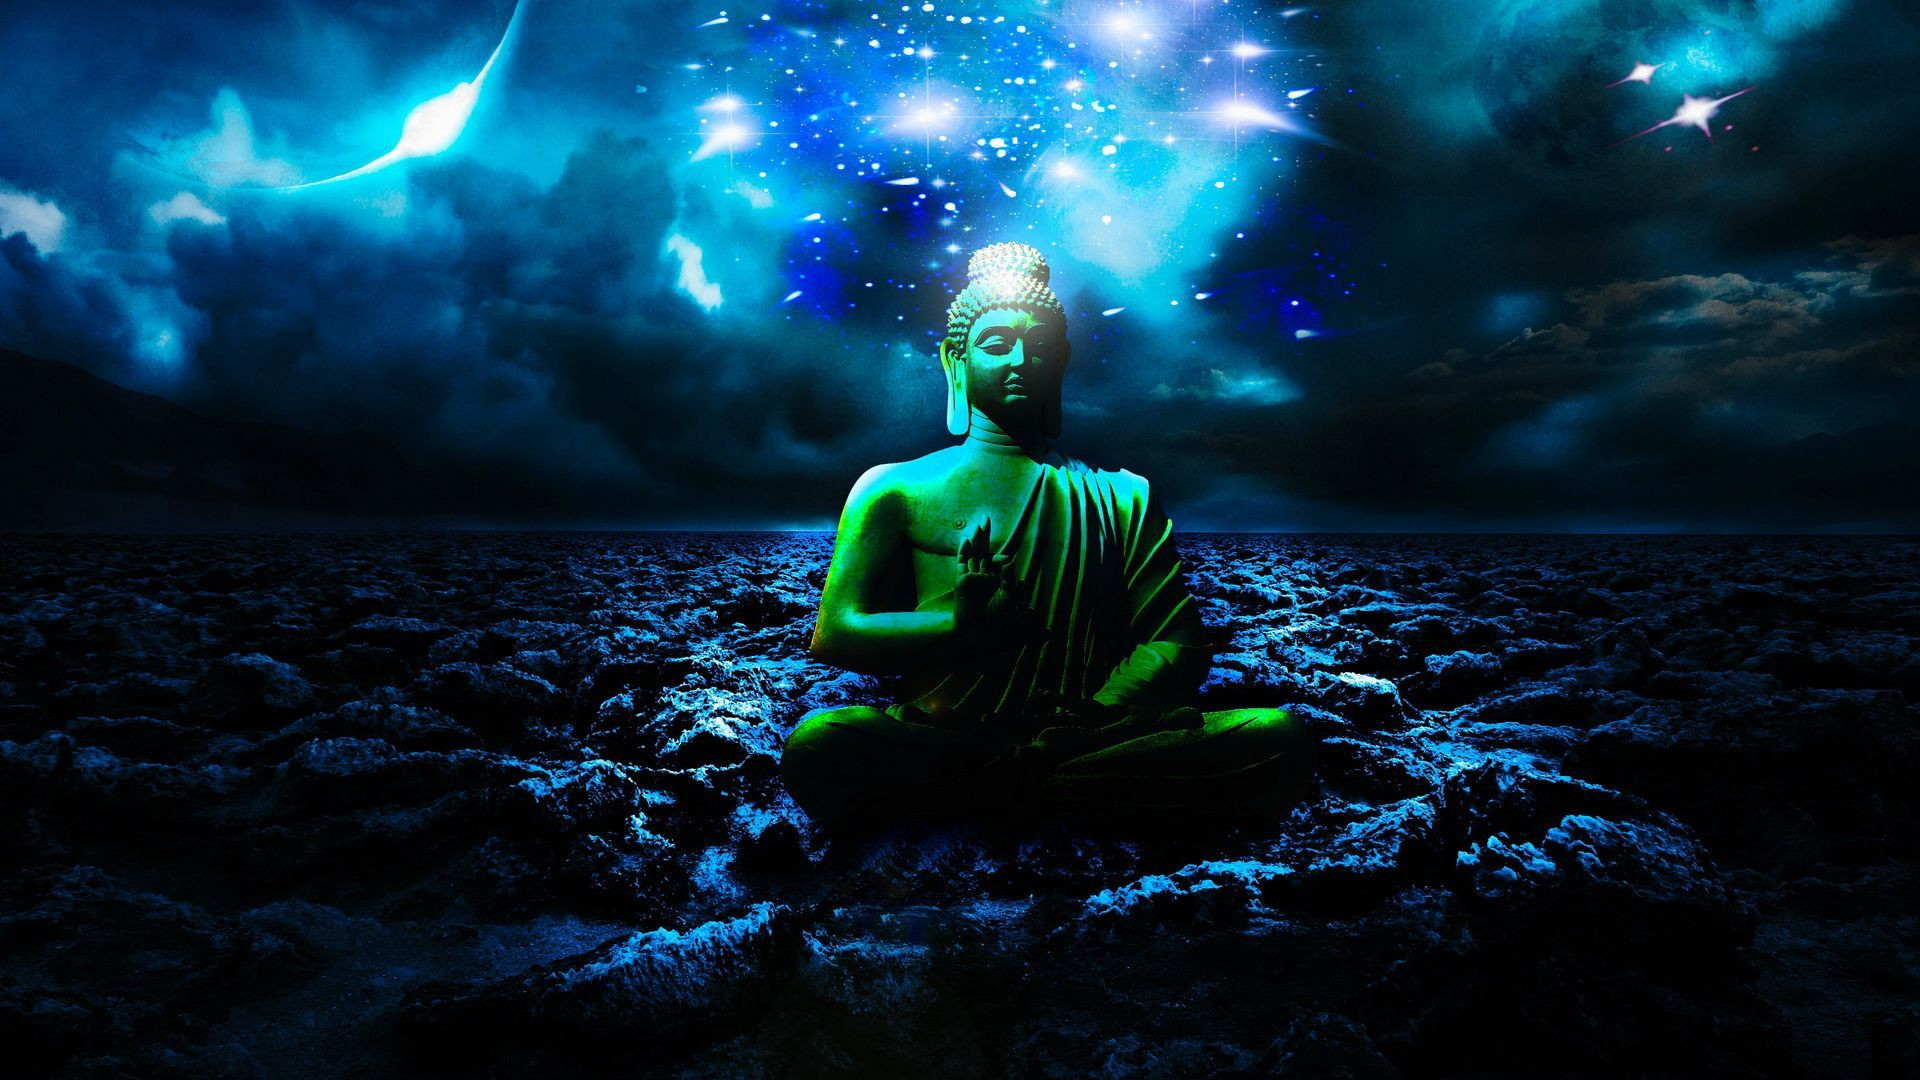 Buddha Meditation Wallpaper Photo px MB Other android art buddha wallpapers chakra gallery hd inner peace iphone monk peace and serenity universe widescreen